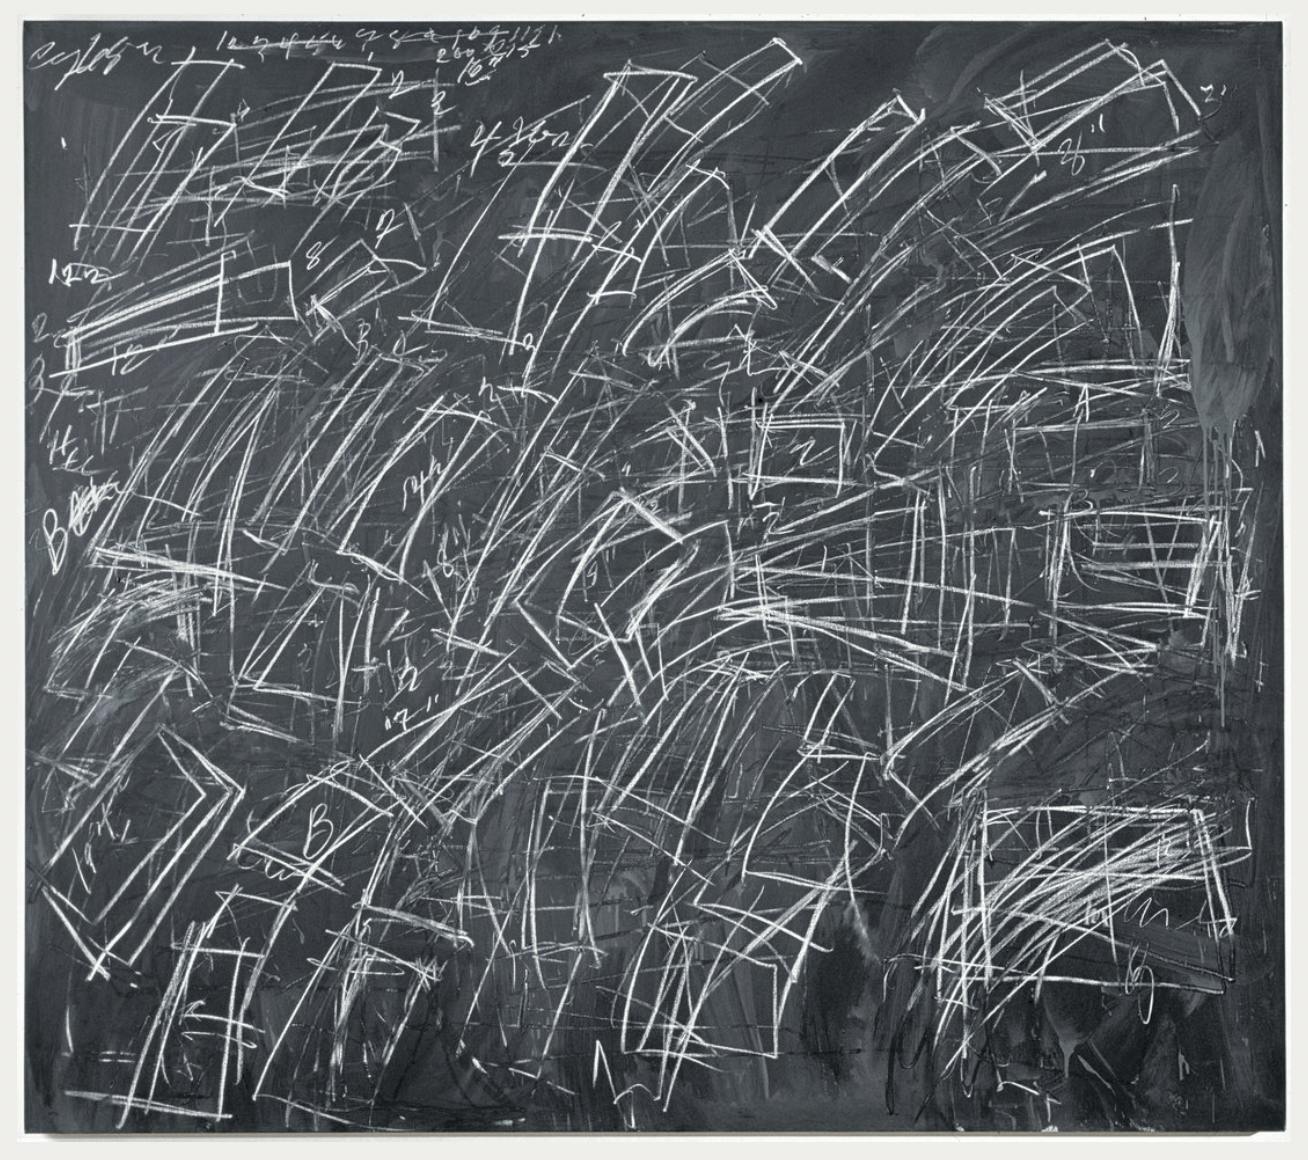 Untitled, Cy Twombly (1967)